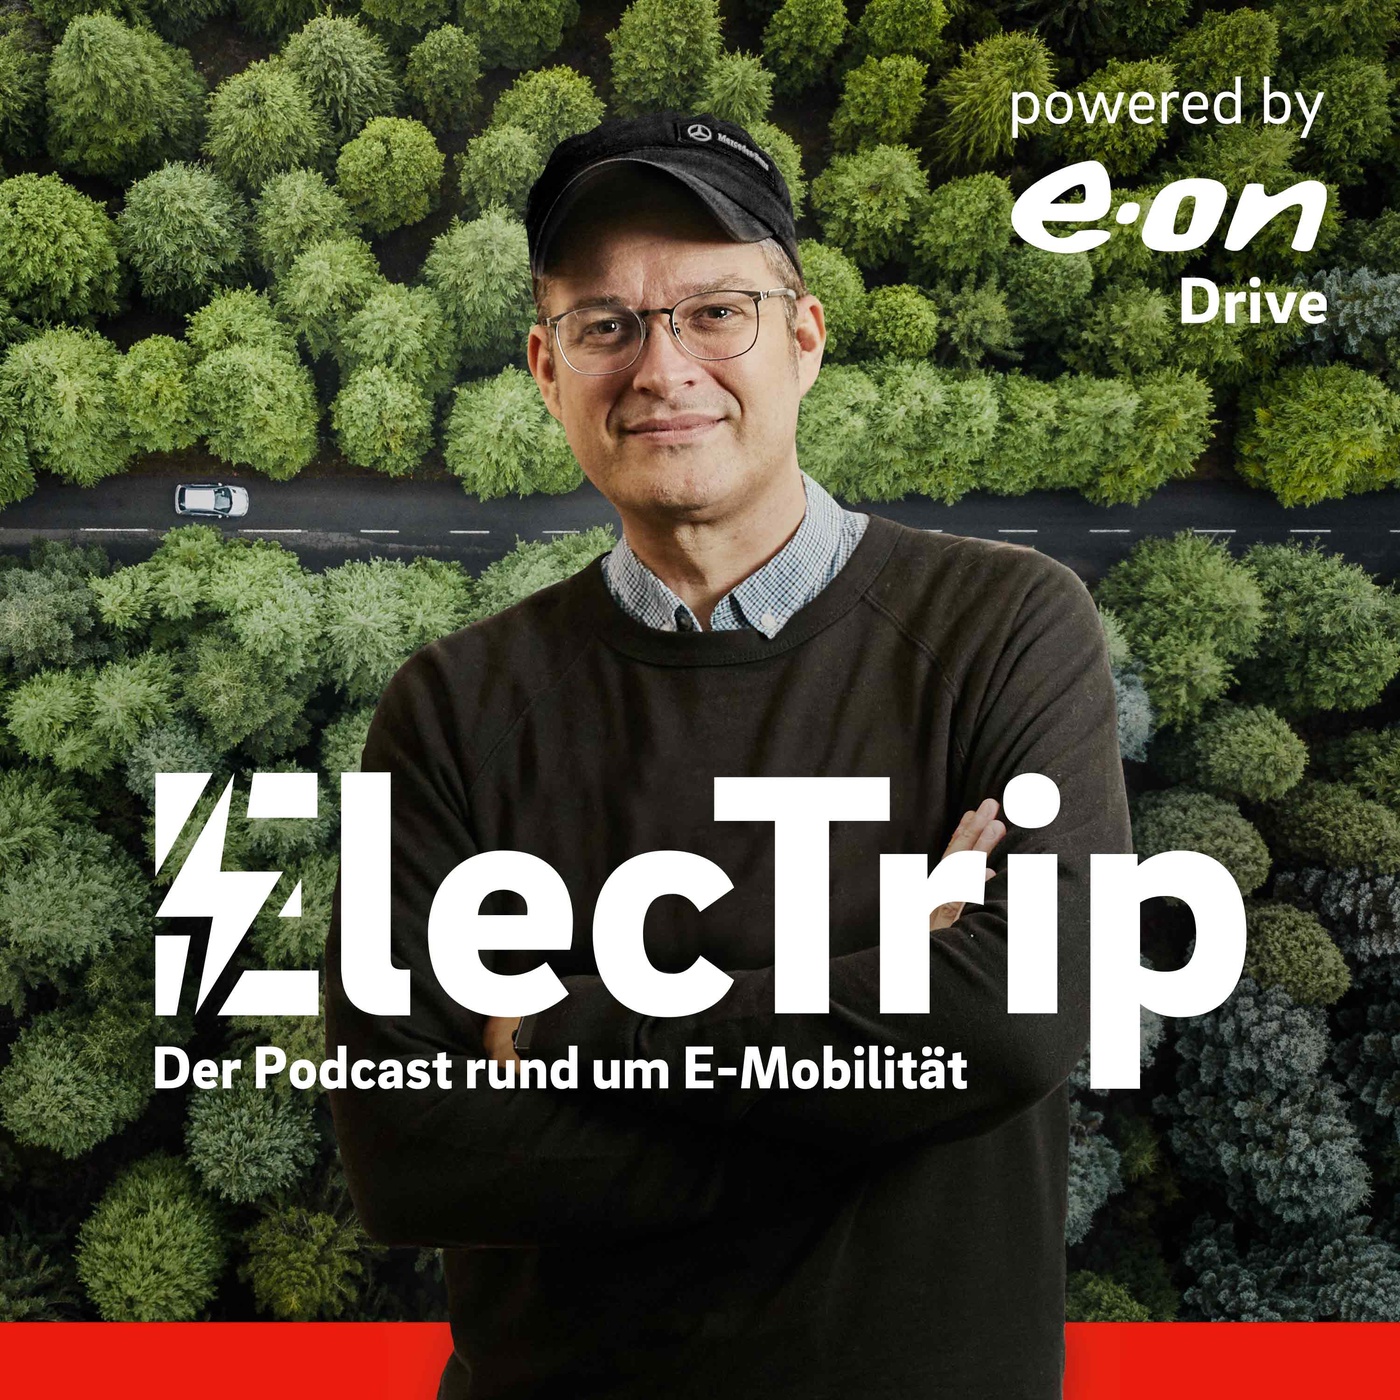 ElecTrip powered by E.ON Drive